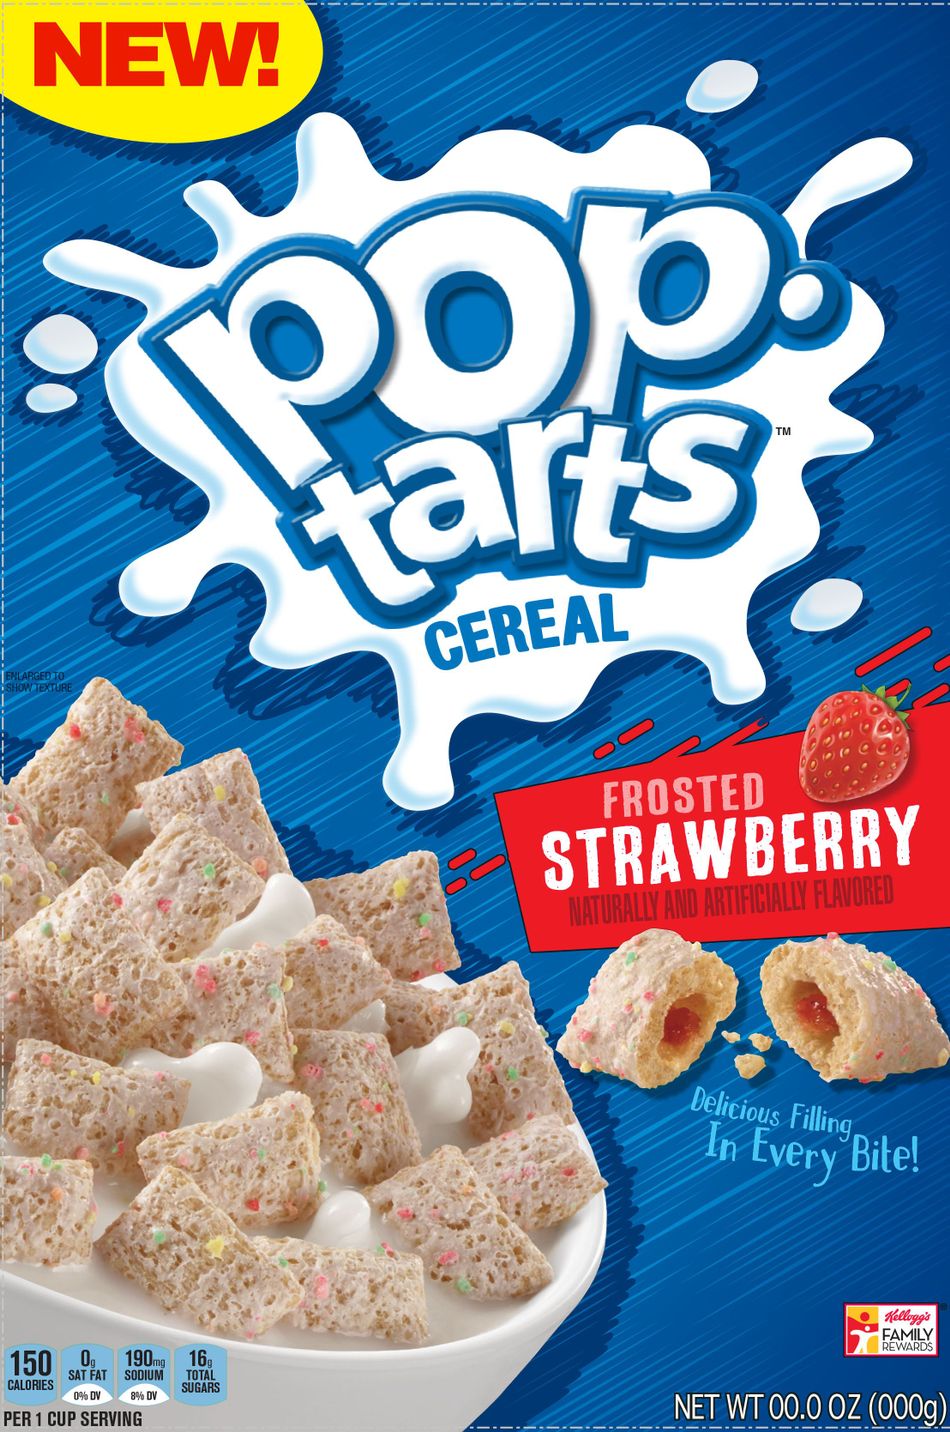 PopTarts Crunch Cereal Is Coming Back To Shelves Soon